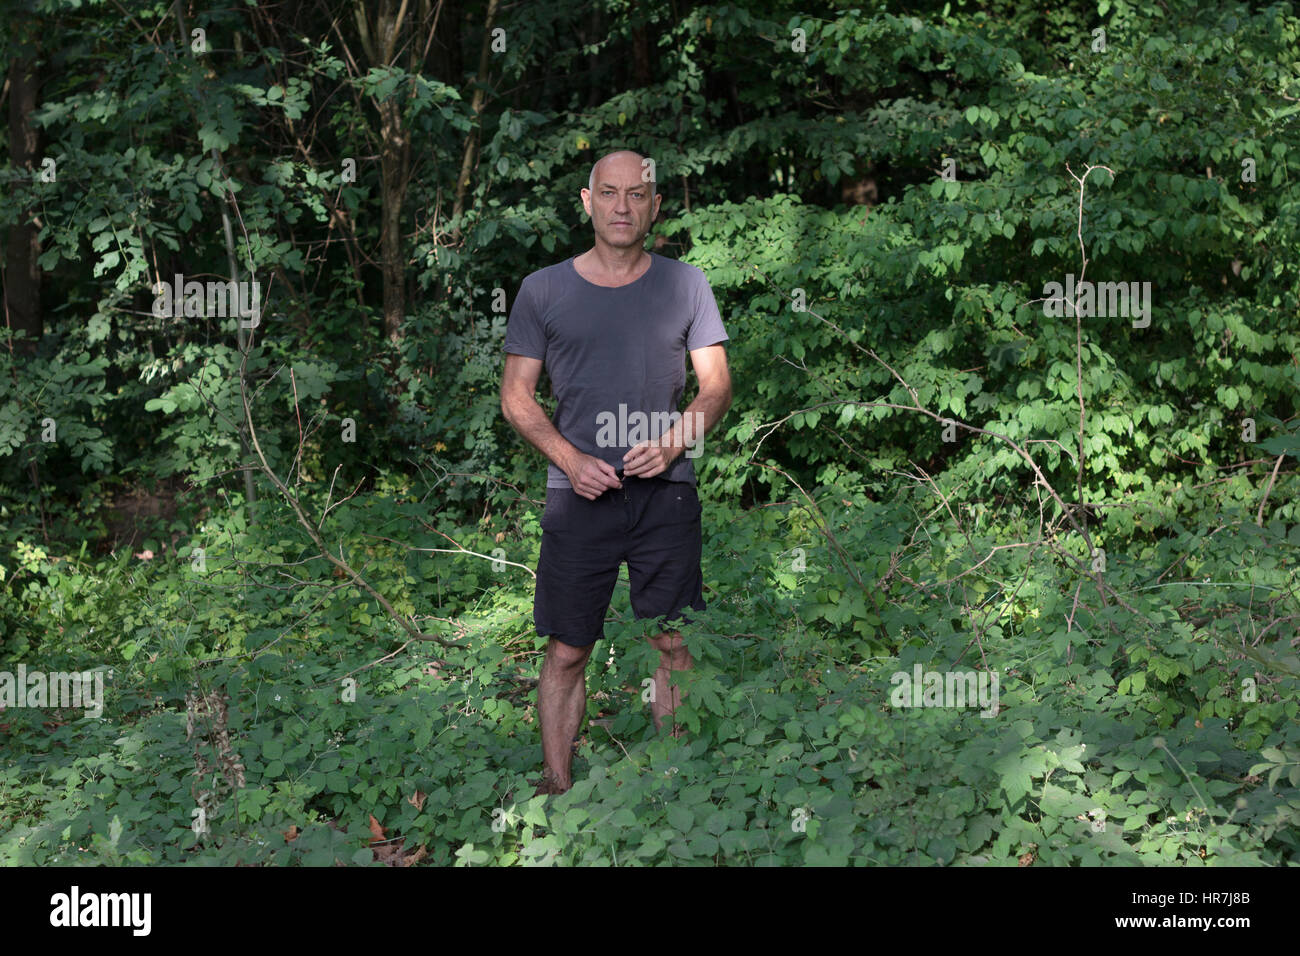 Portrait of a man standing in between overgrowth of a forest Stock Photo